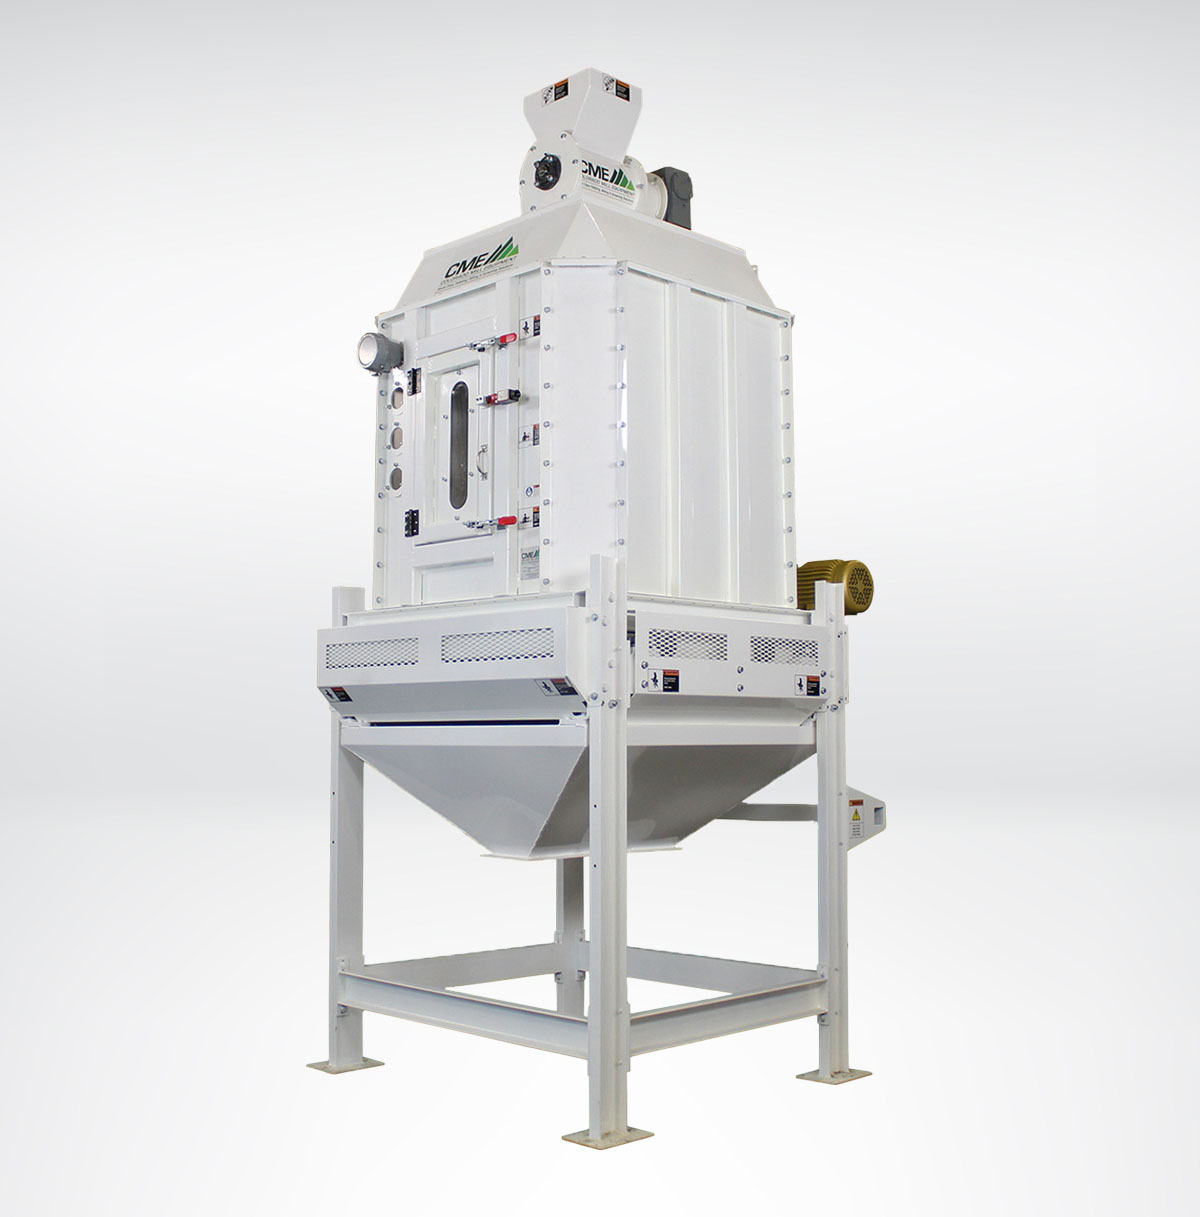 Pellet Coolers by Colorado Mill Equipment | USA Equipment | MILL-C4 Pellet Cooler 2HP for 1-4 tons of pellets per hour